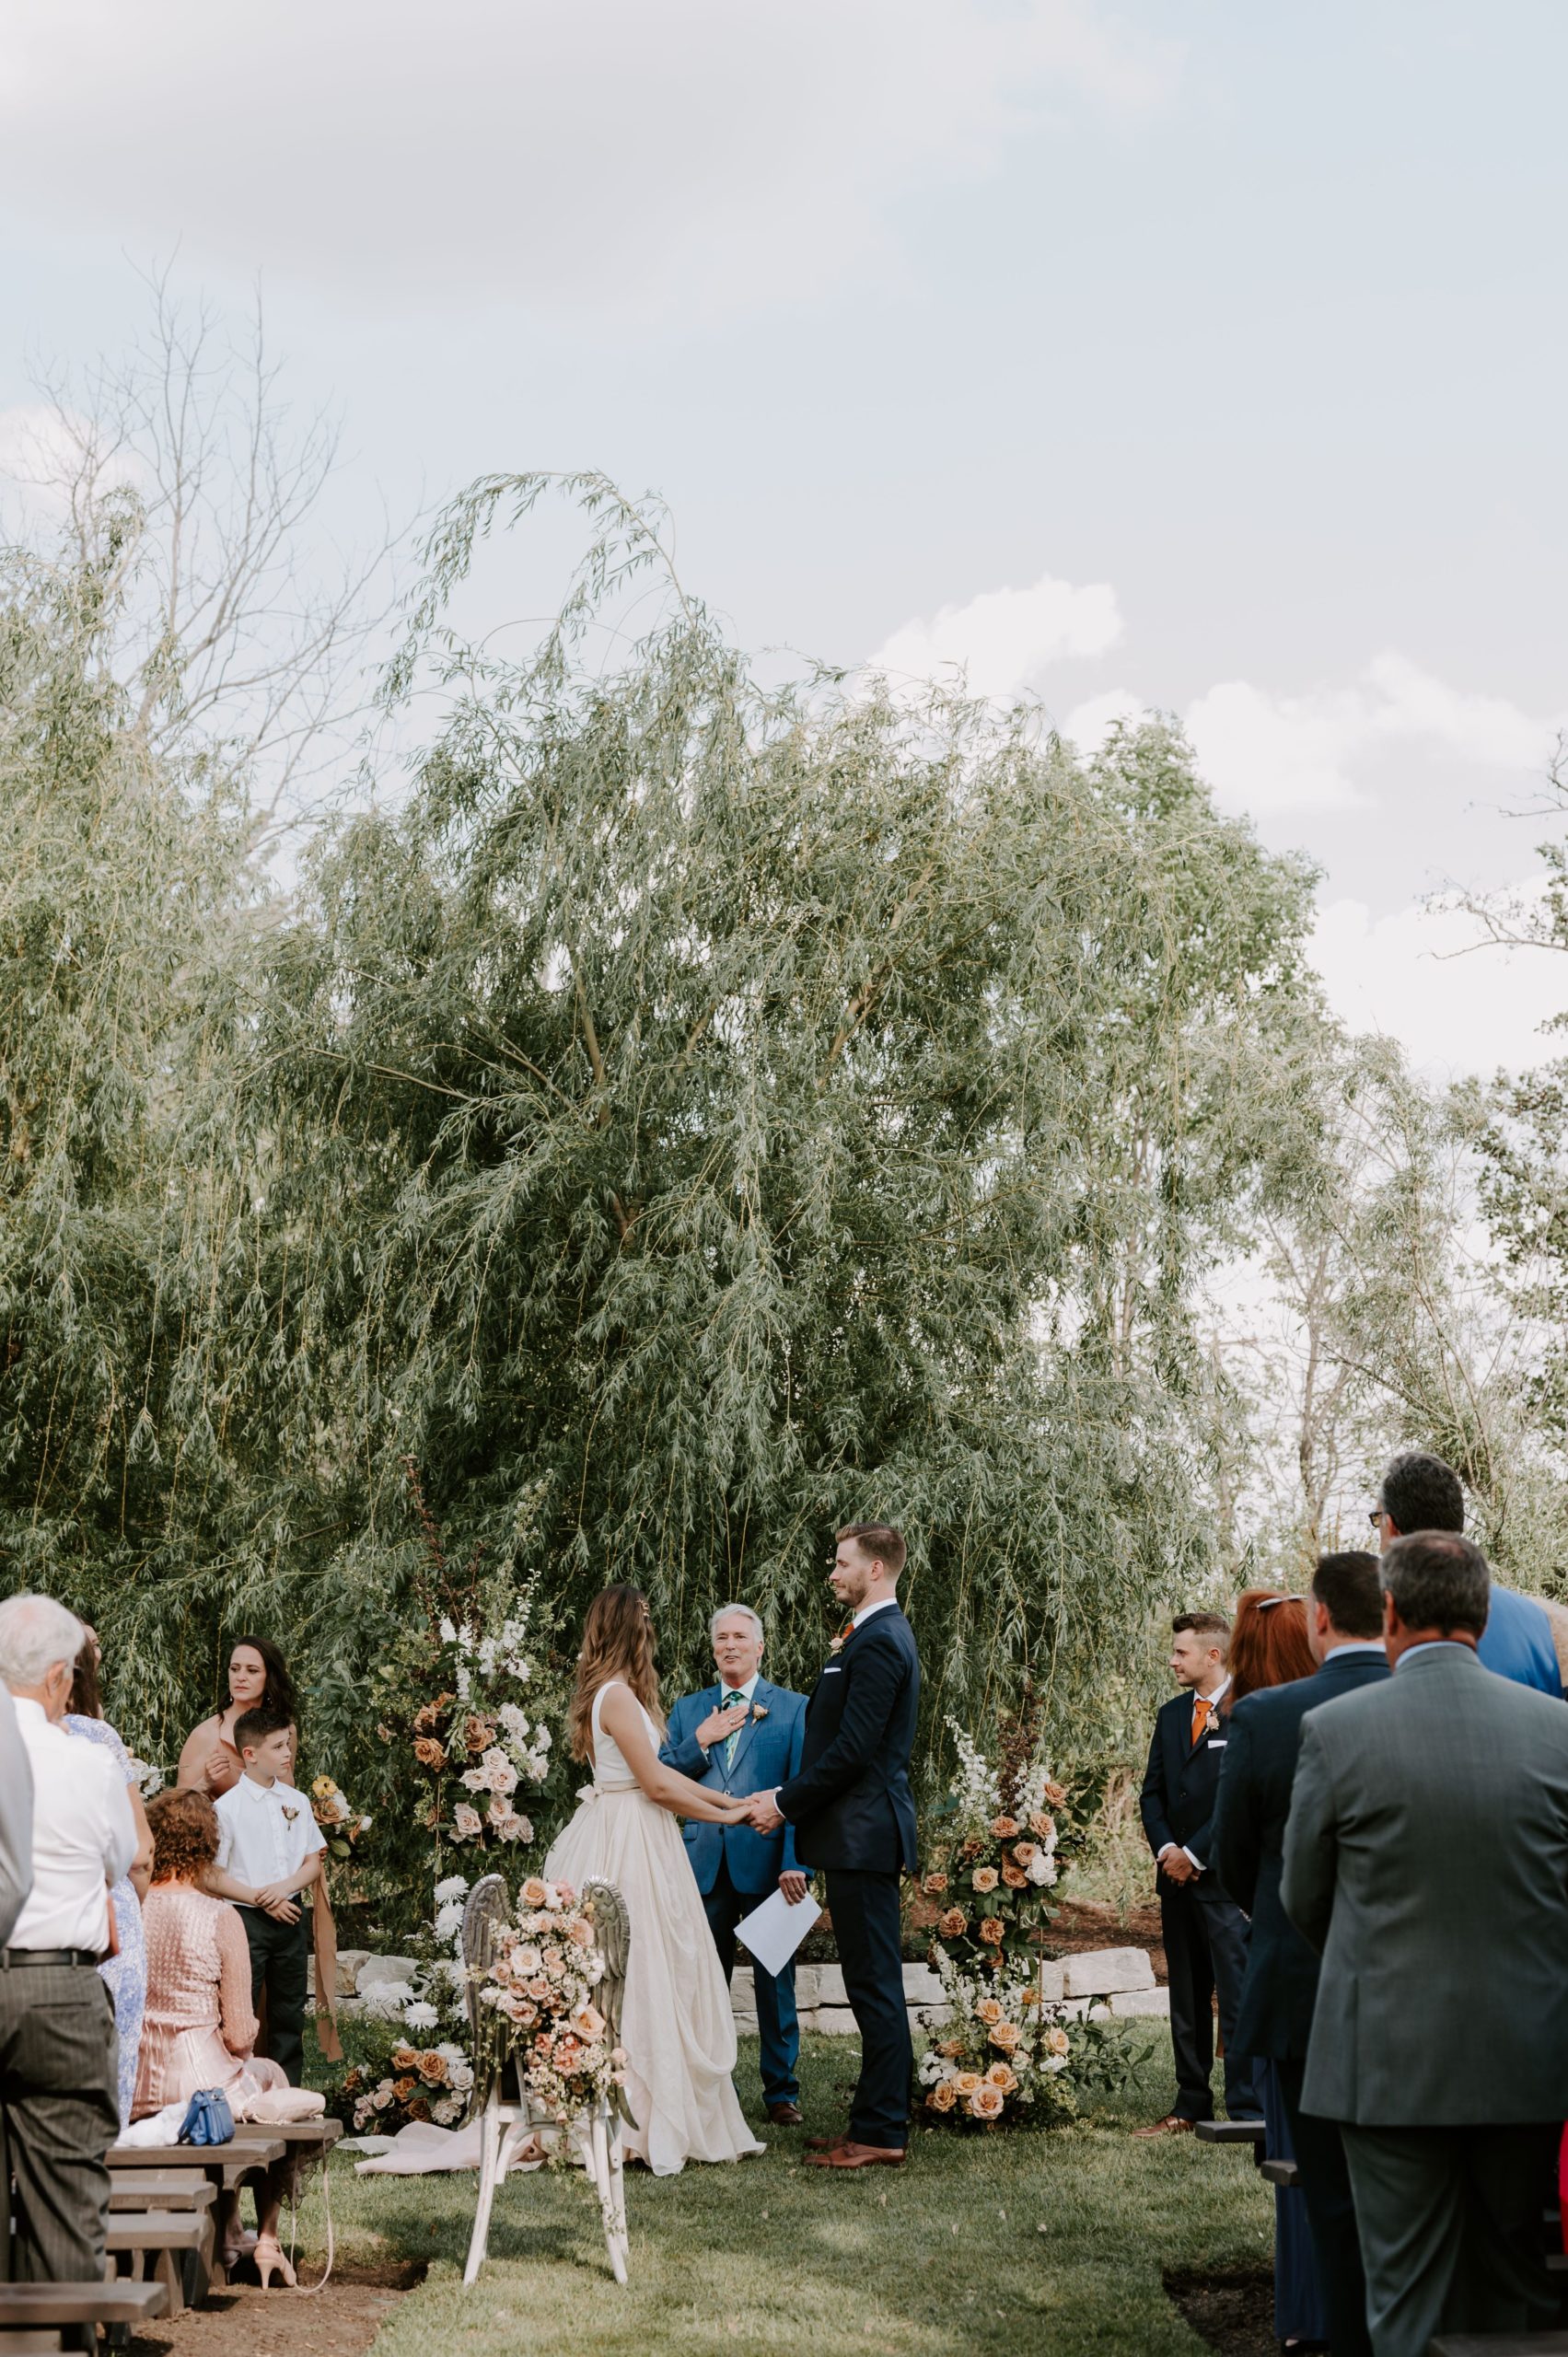 Tess & Dave's Earthy Inspired Wedding Day